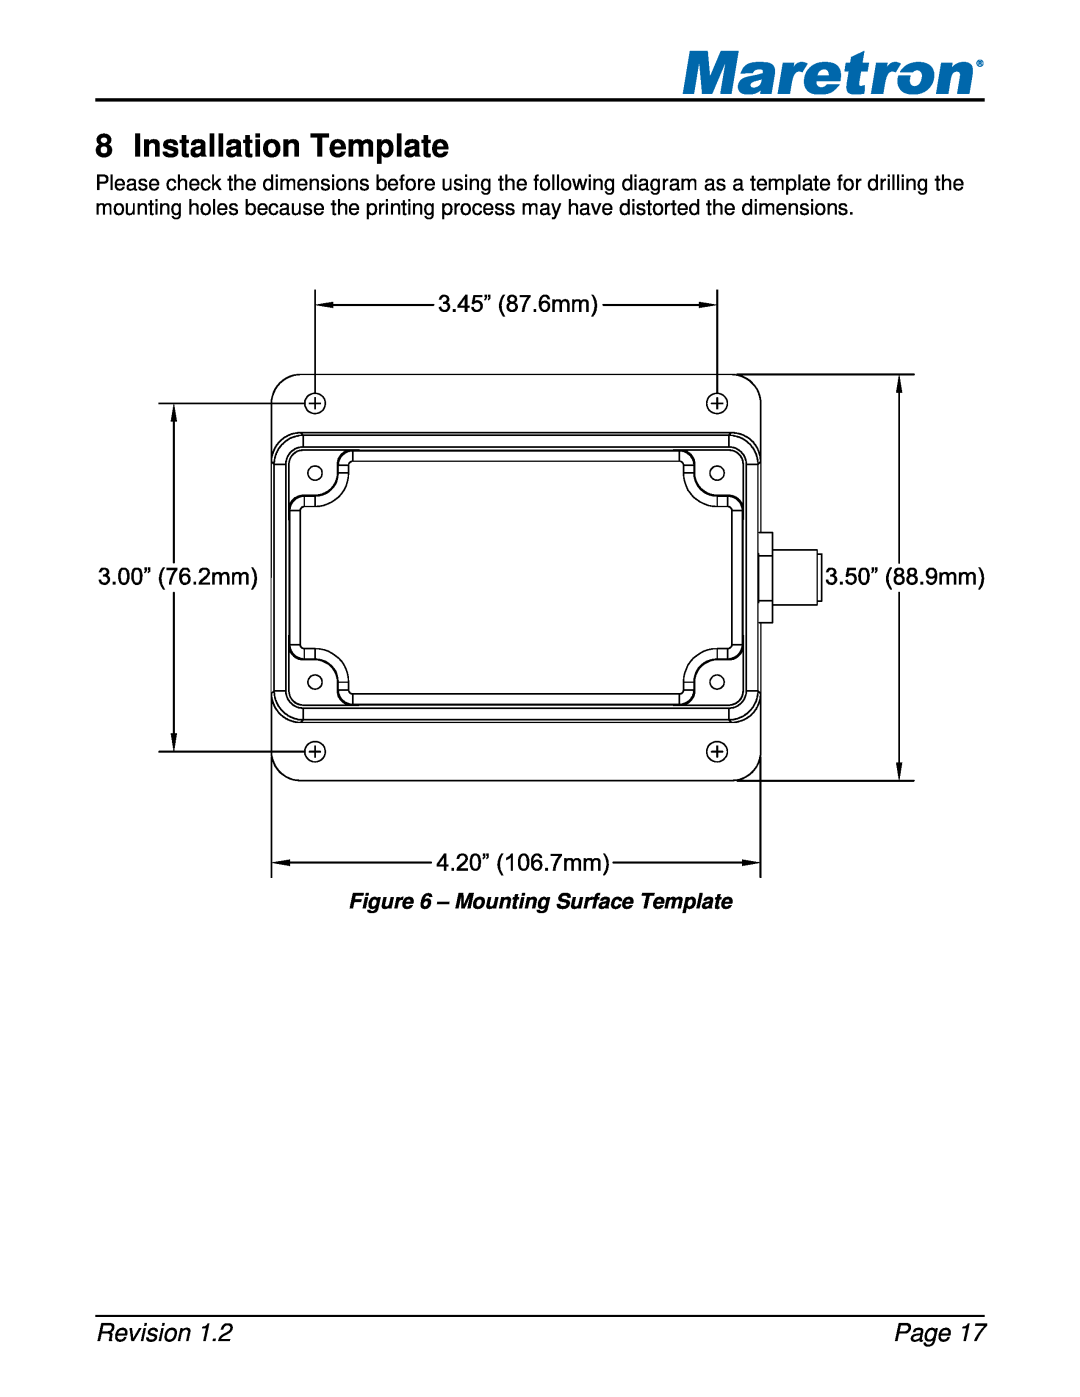 Maretron ACM100 user manual Installation Template, Revision, Page, Mounting Surface Template 